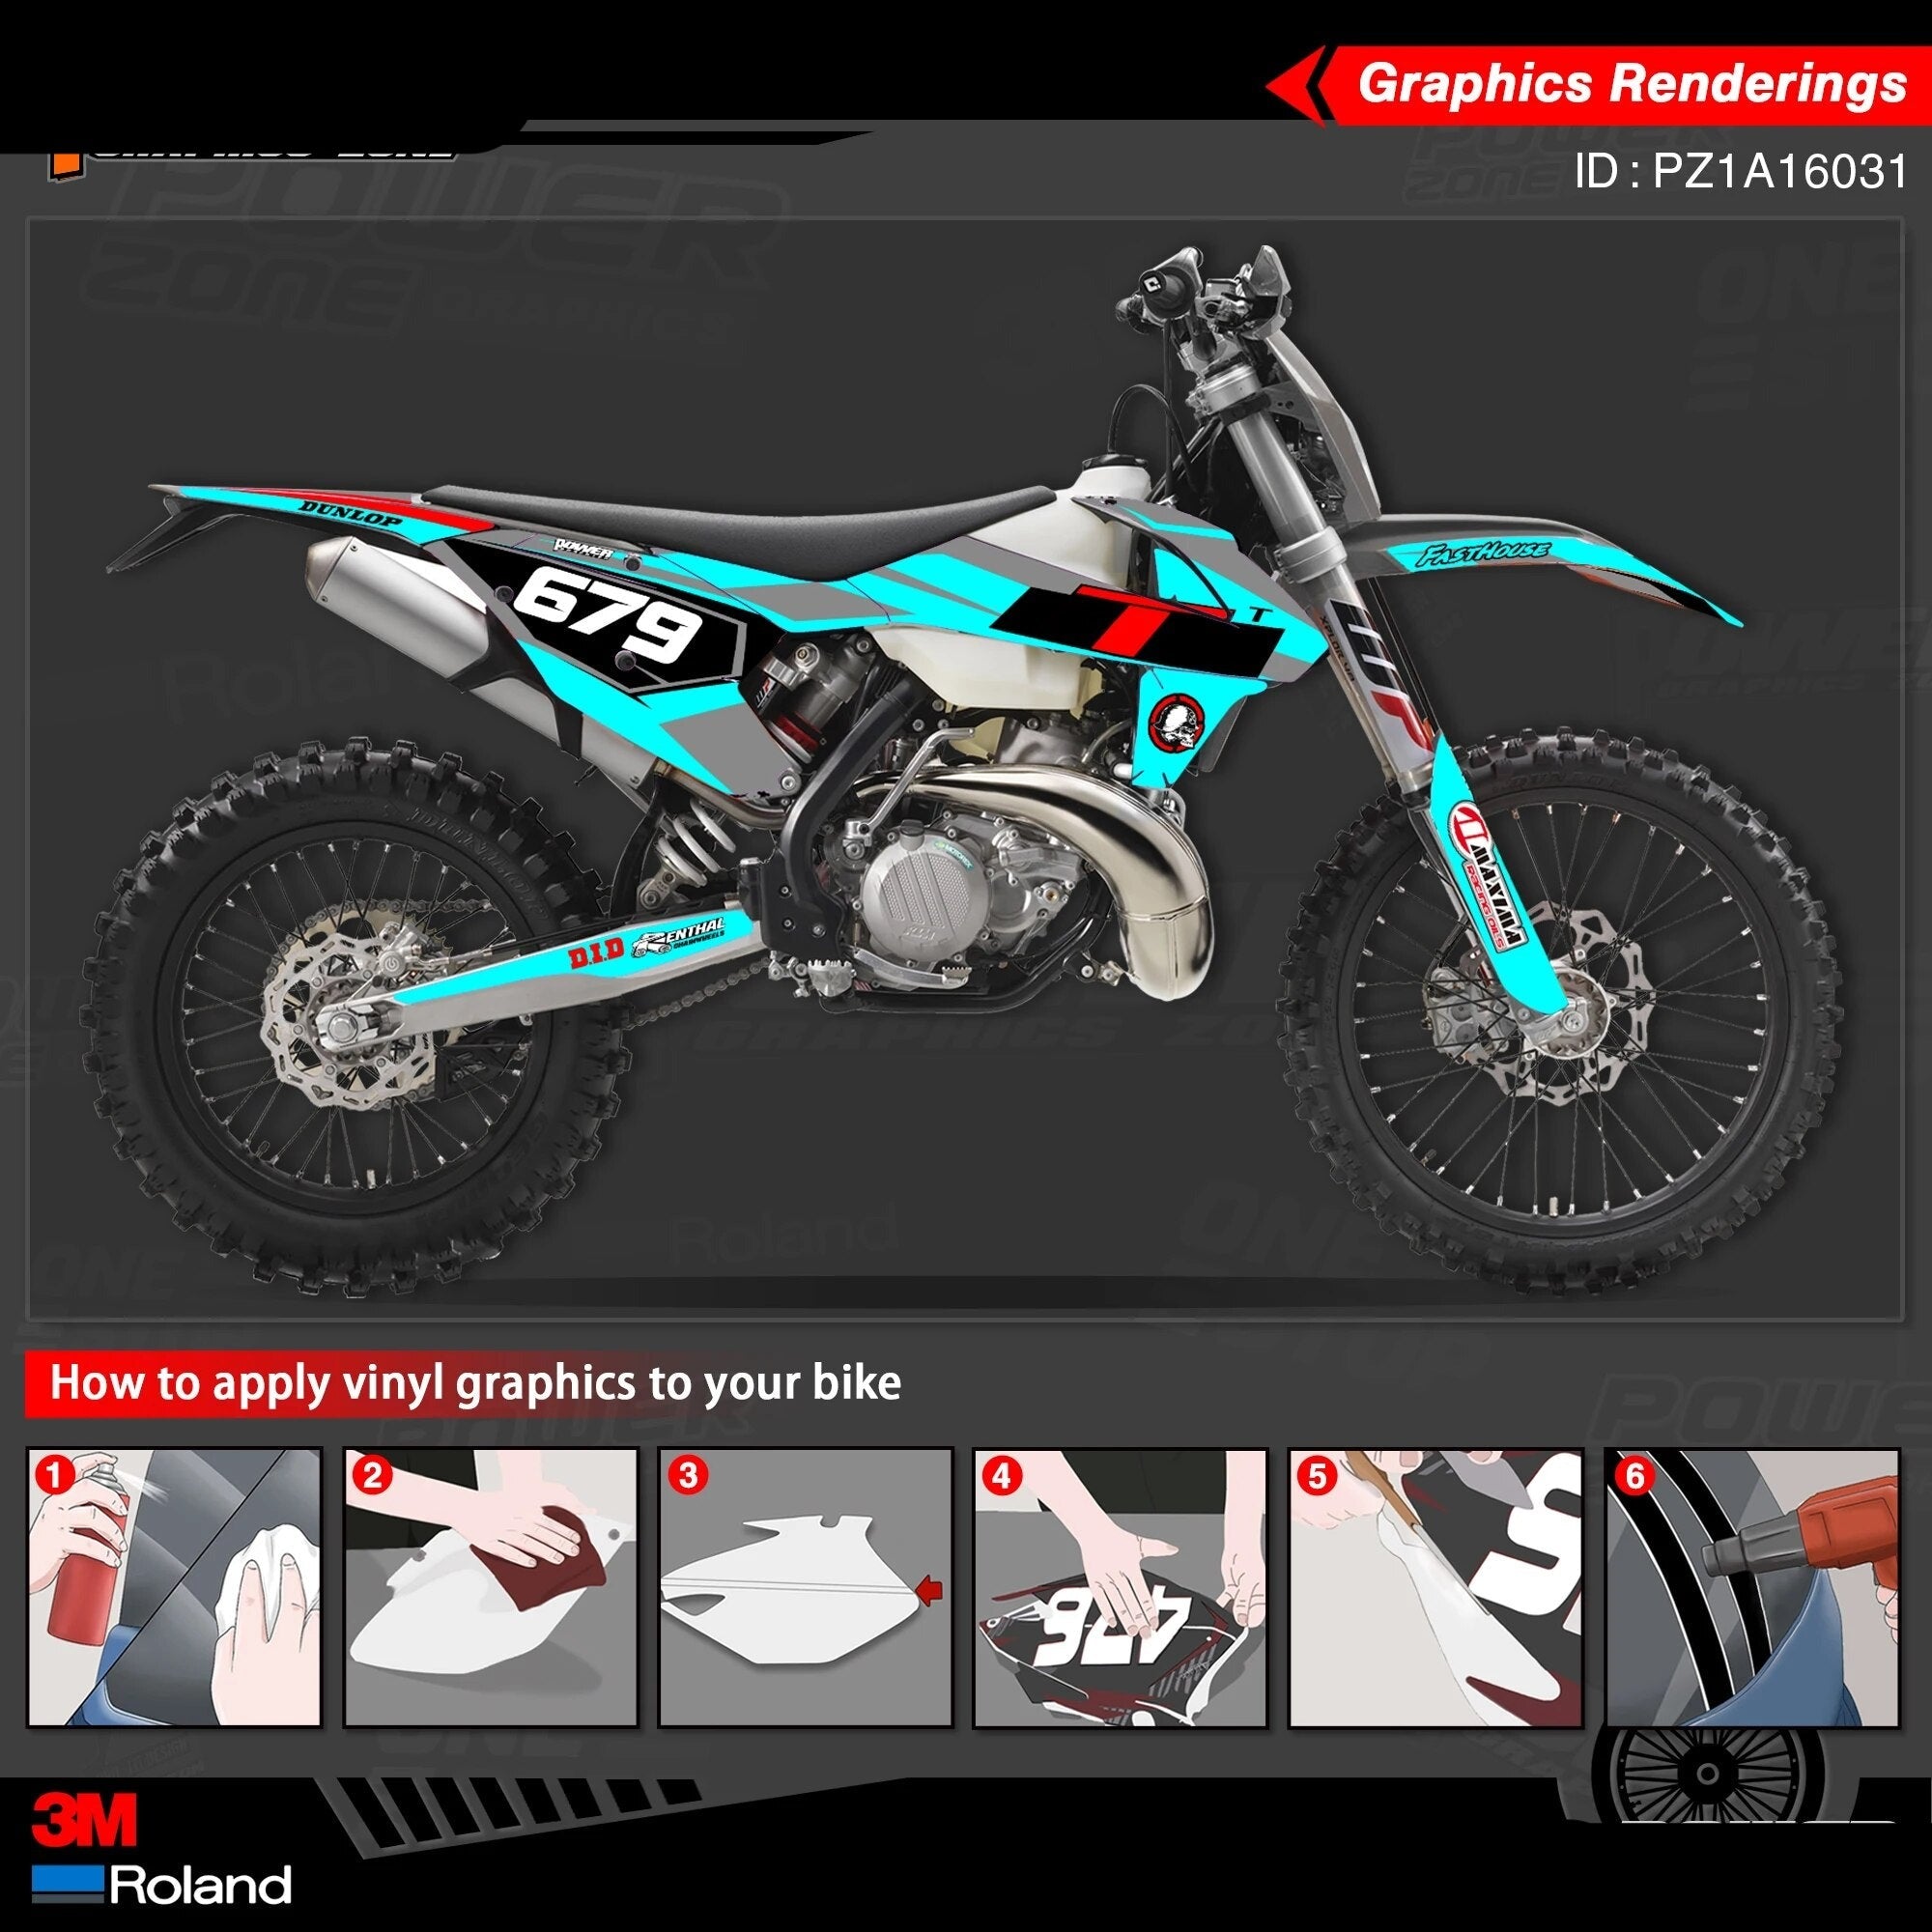 3M Stickers for Bikes 125-500cc